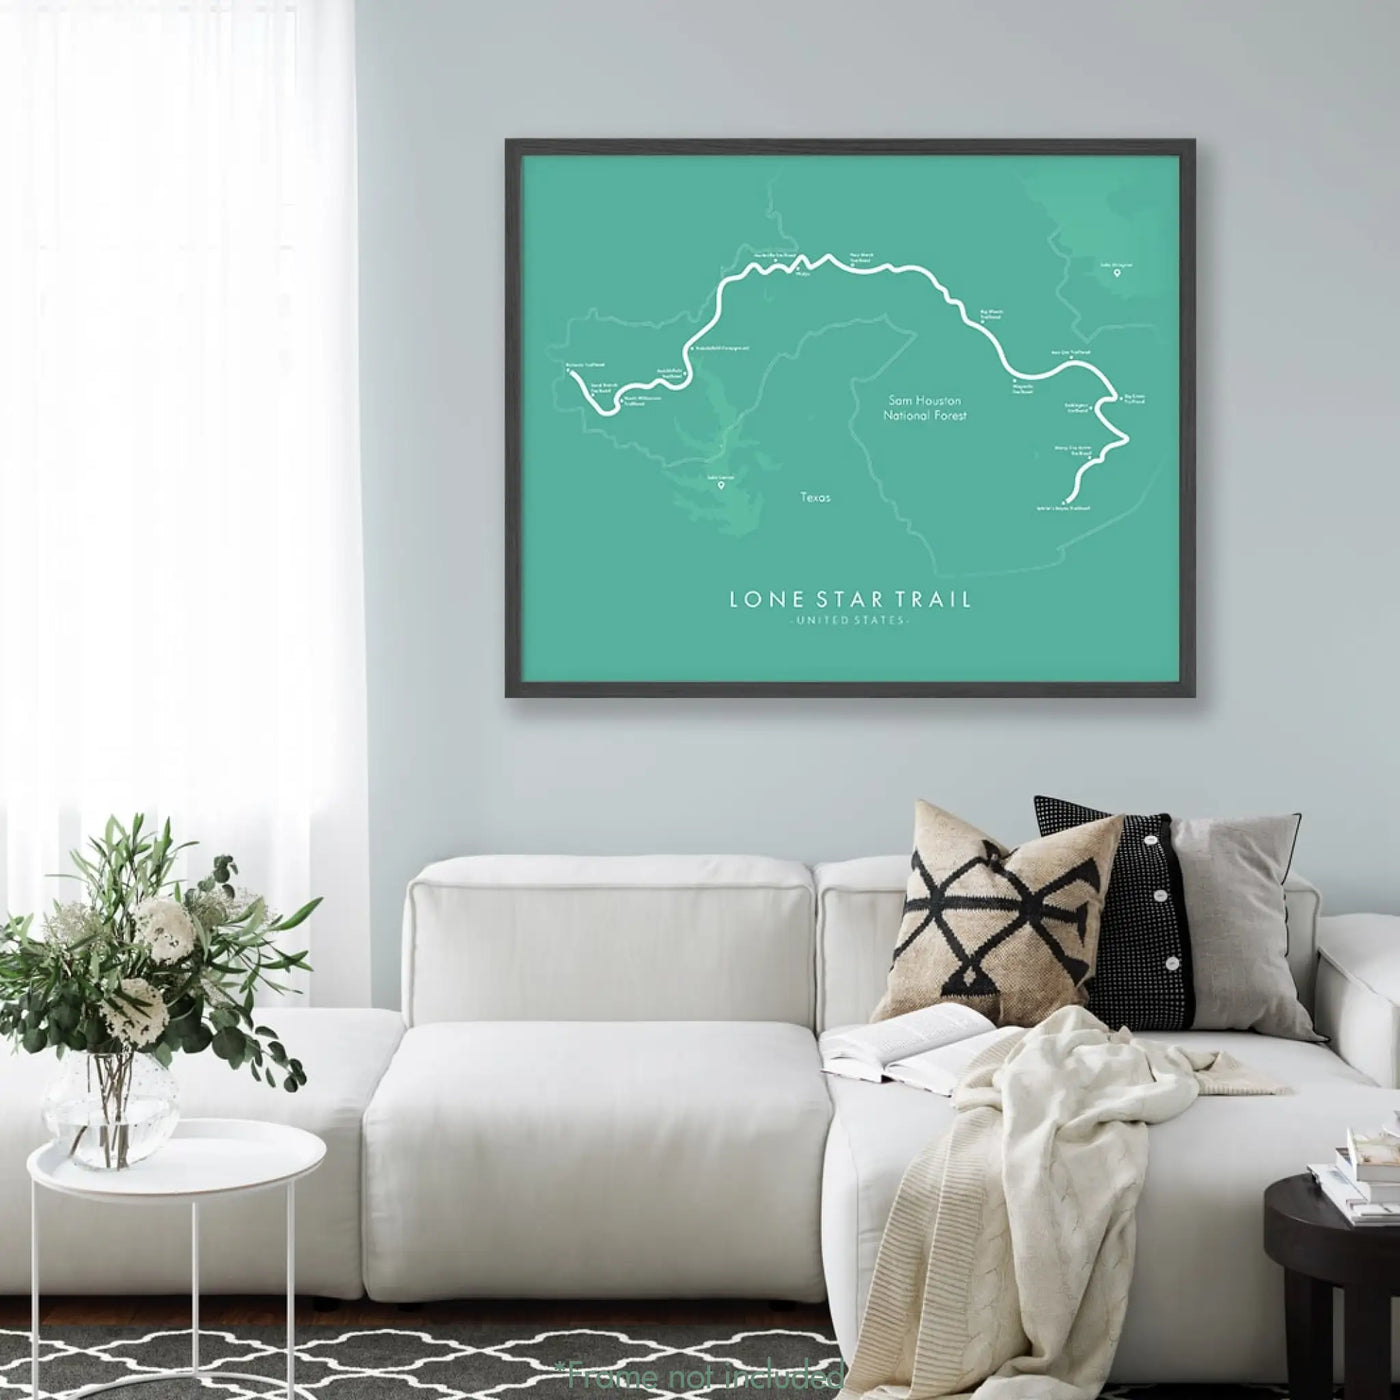 Trail Poster of Lone Star Trail - Teal Mockup